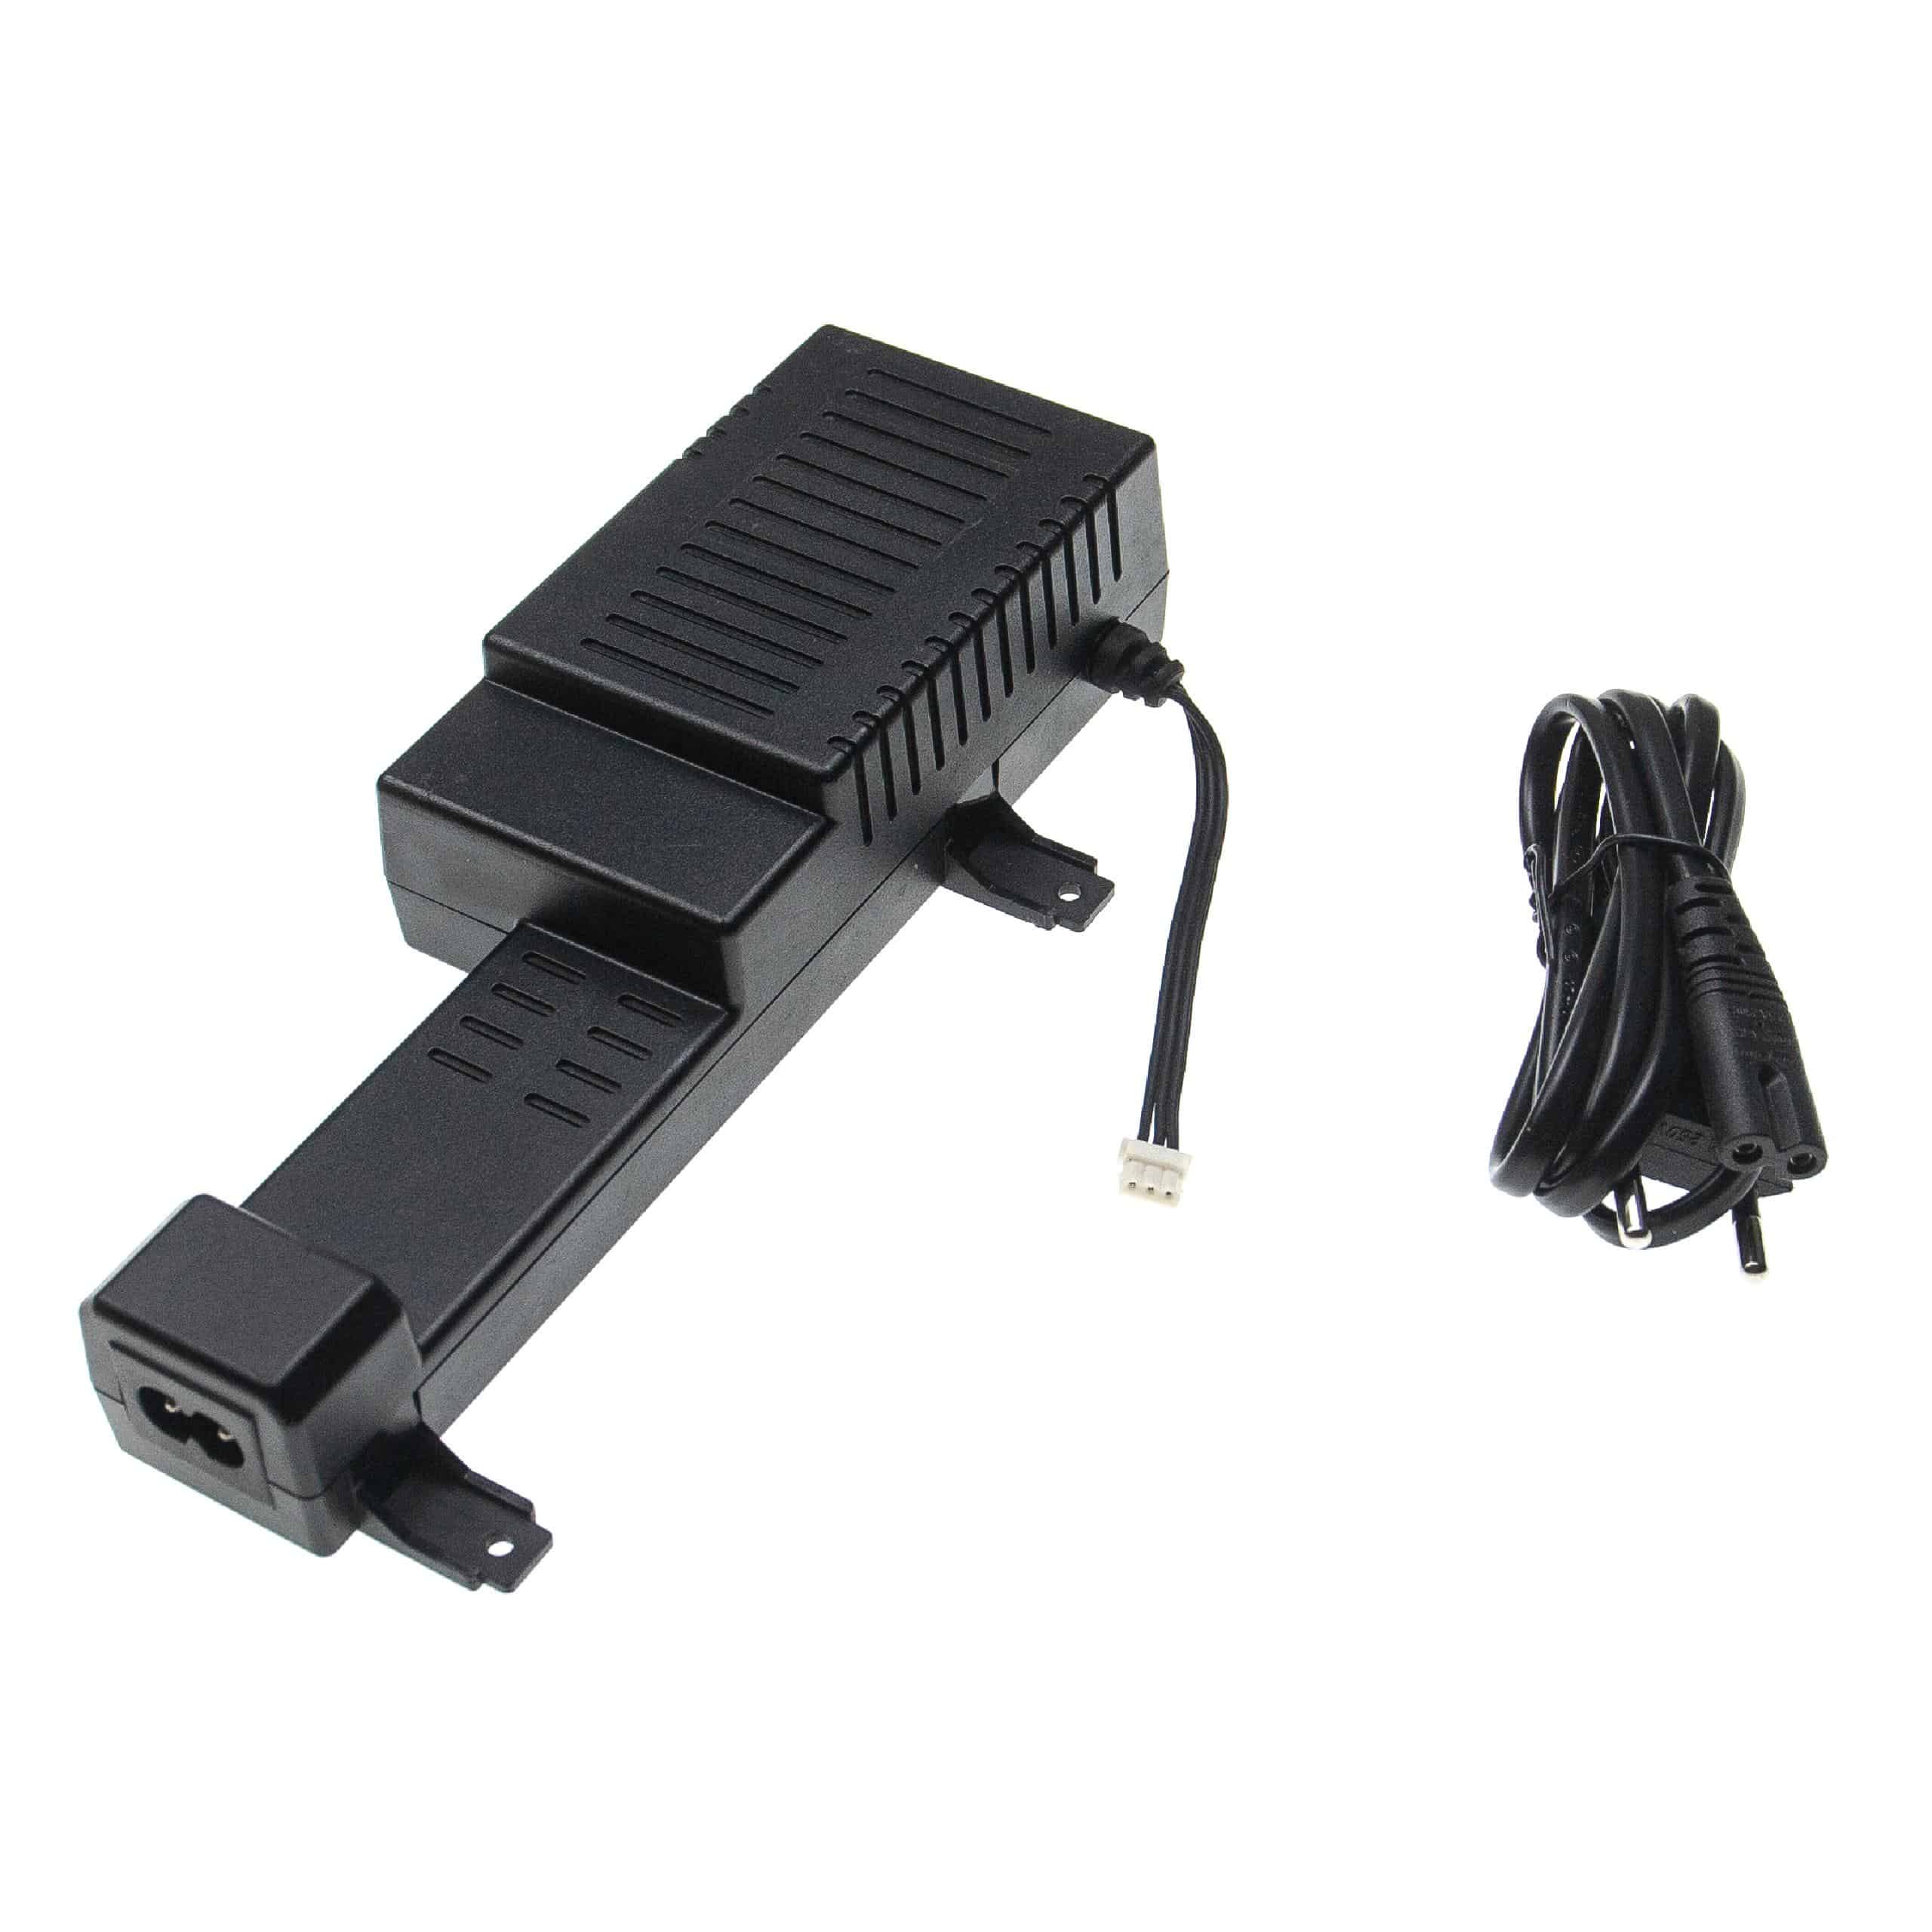 Mains Power Adapter replaces HP CM751-60045, CM751-60046, CM751-60190 for Printer